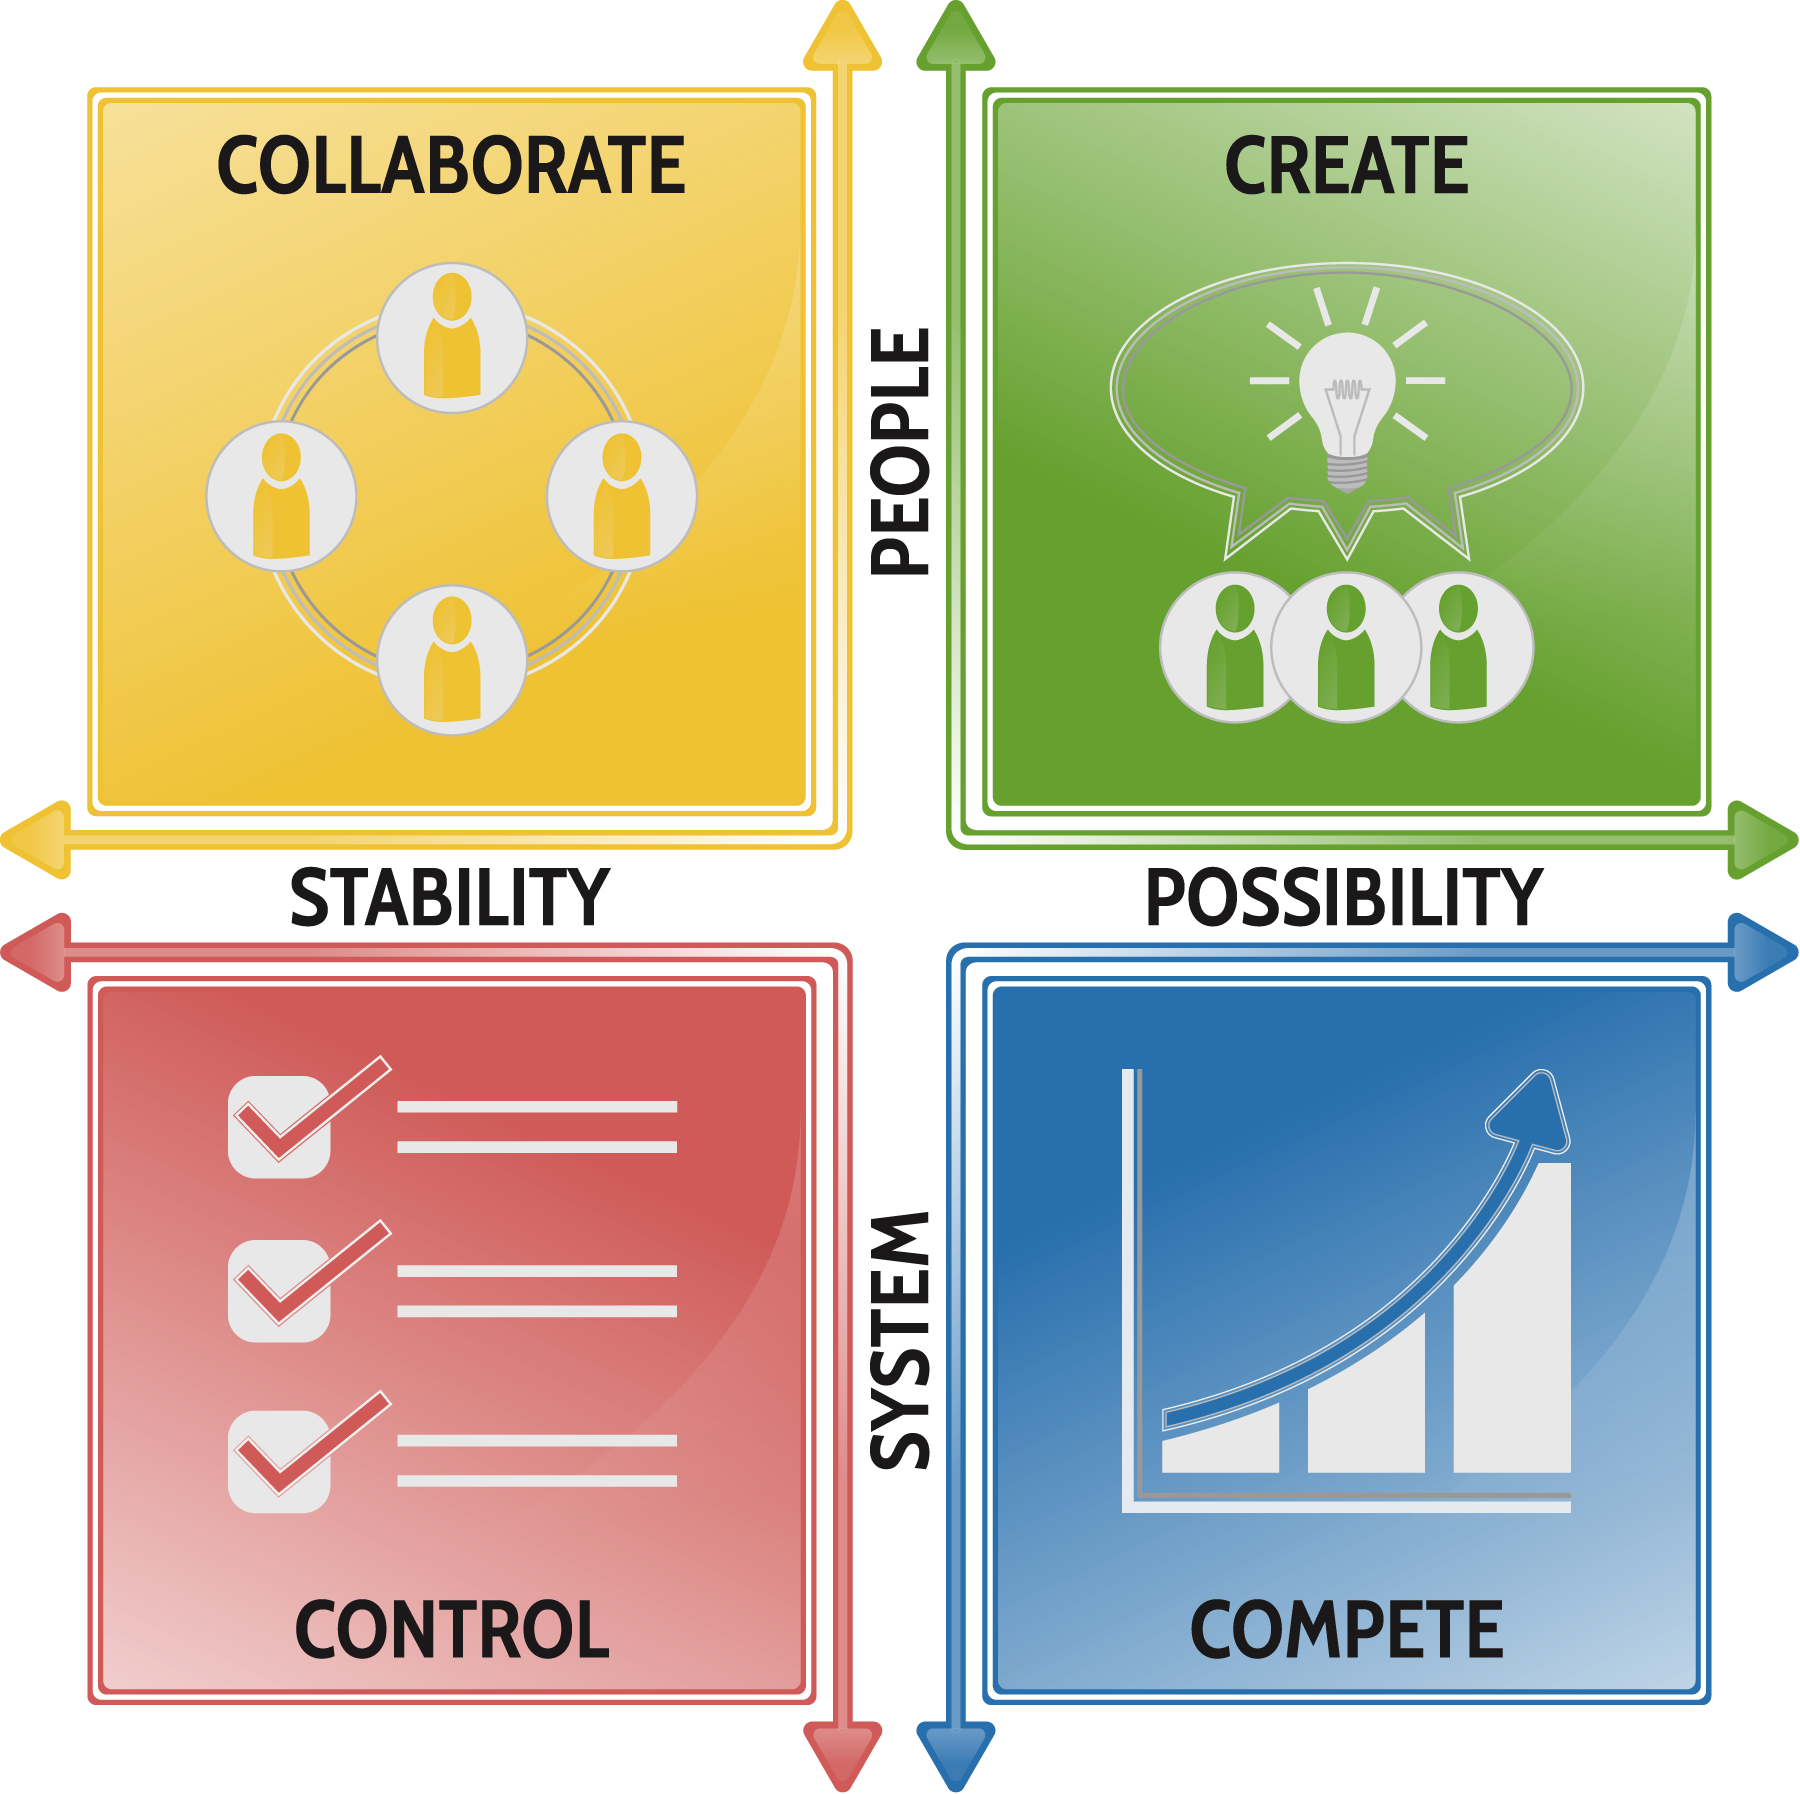 the competing values framework with the four labeled quadrants - collaborate, create, control and compete